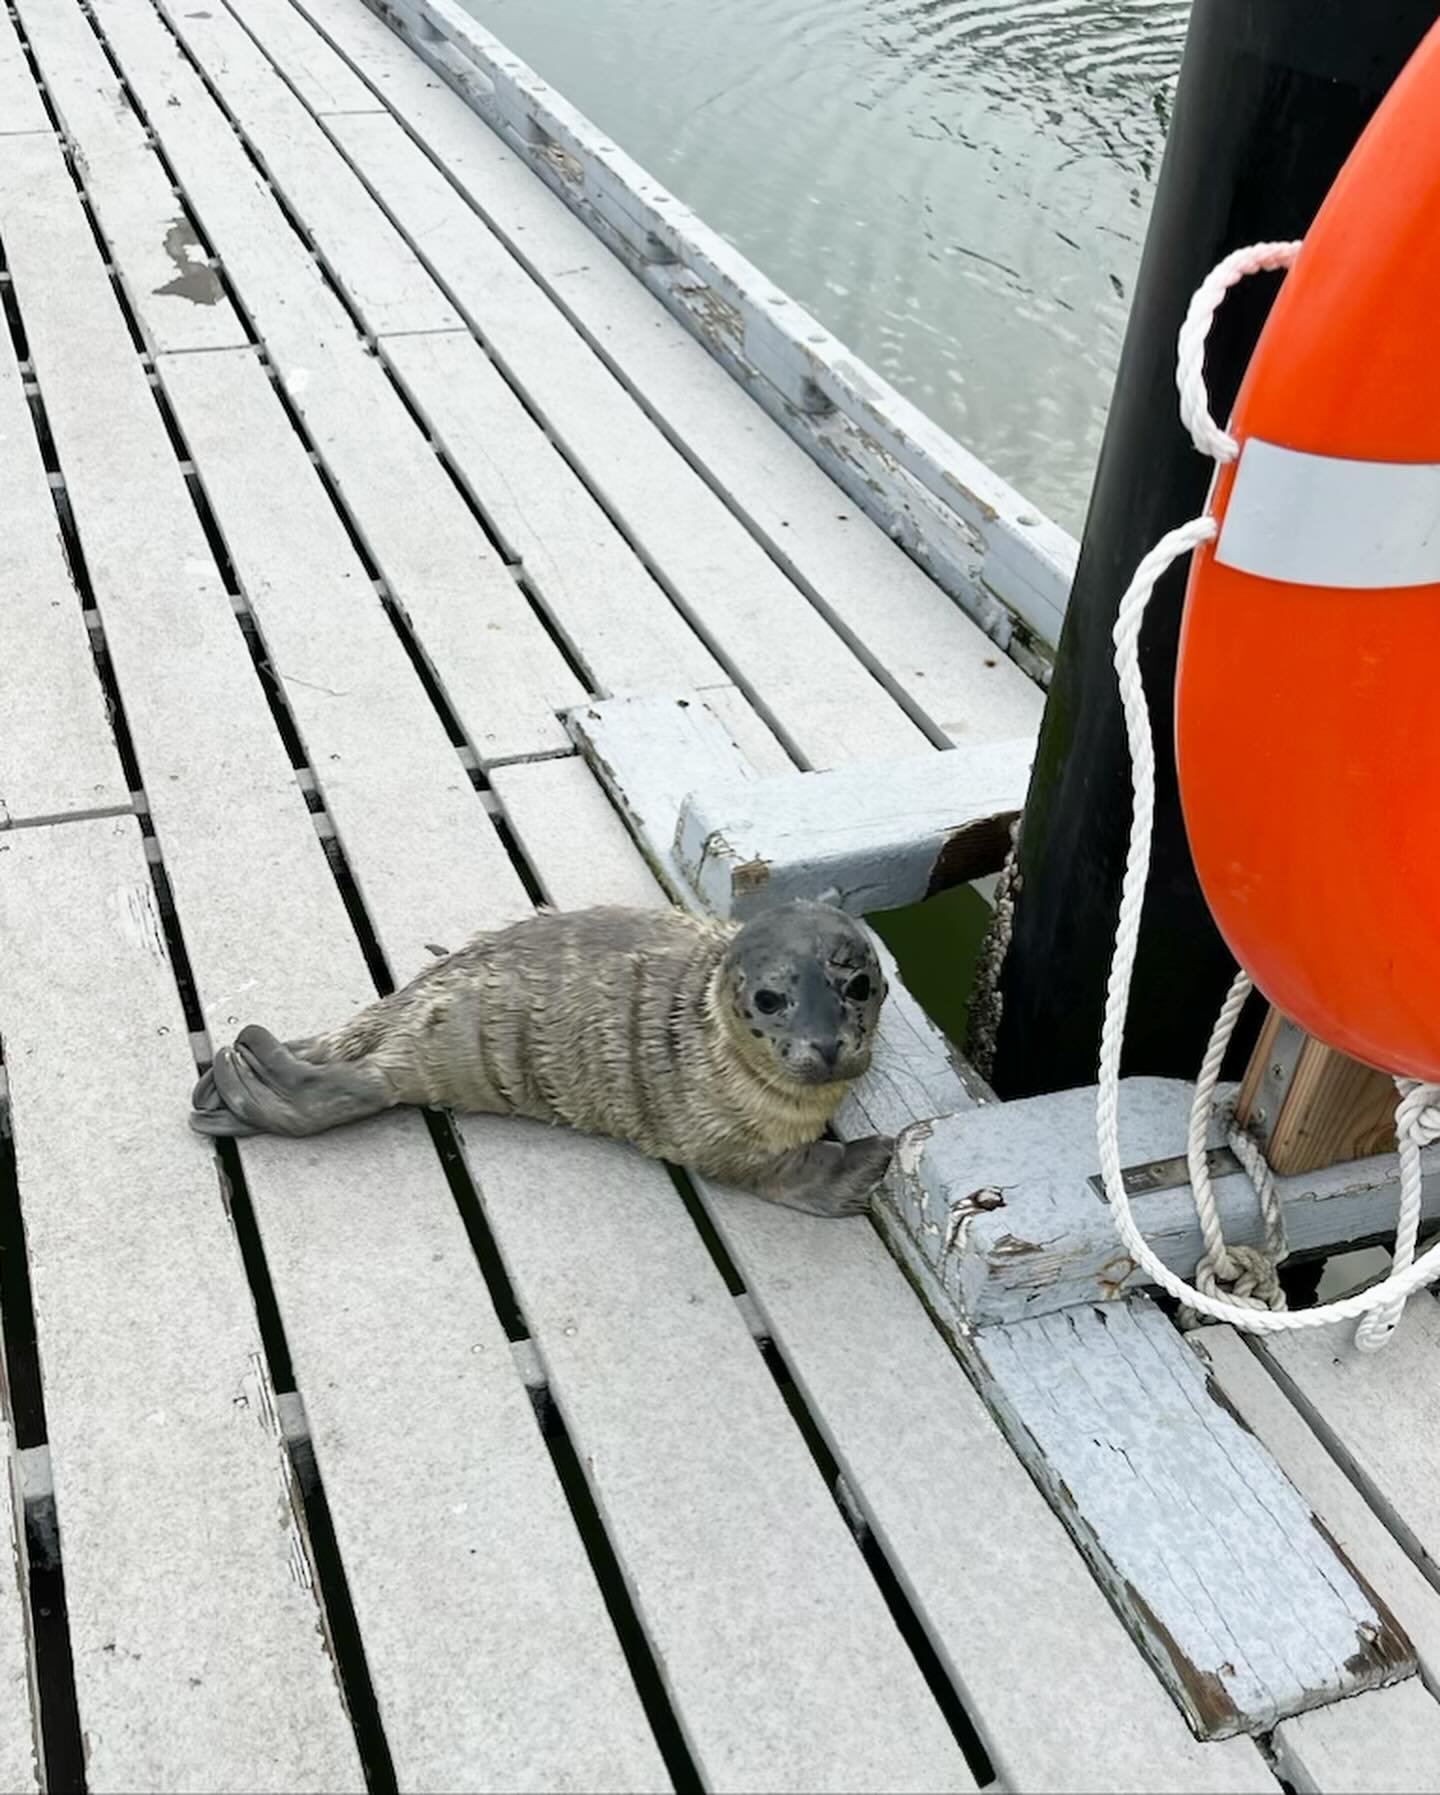 Meet the newest member of the boatyard, &ldquo;Spaulding&rdquo;! This harbor seal pup was rescued by one of our technicians on the dock last week. The lone pup was admitted to the Marine Mammal Science Center to have a check up and they named him Spa